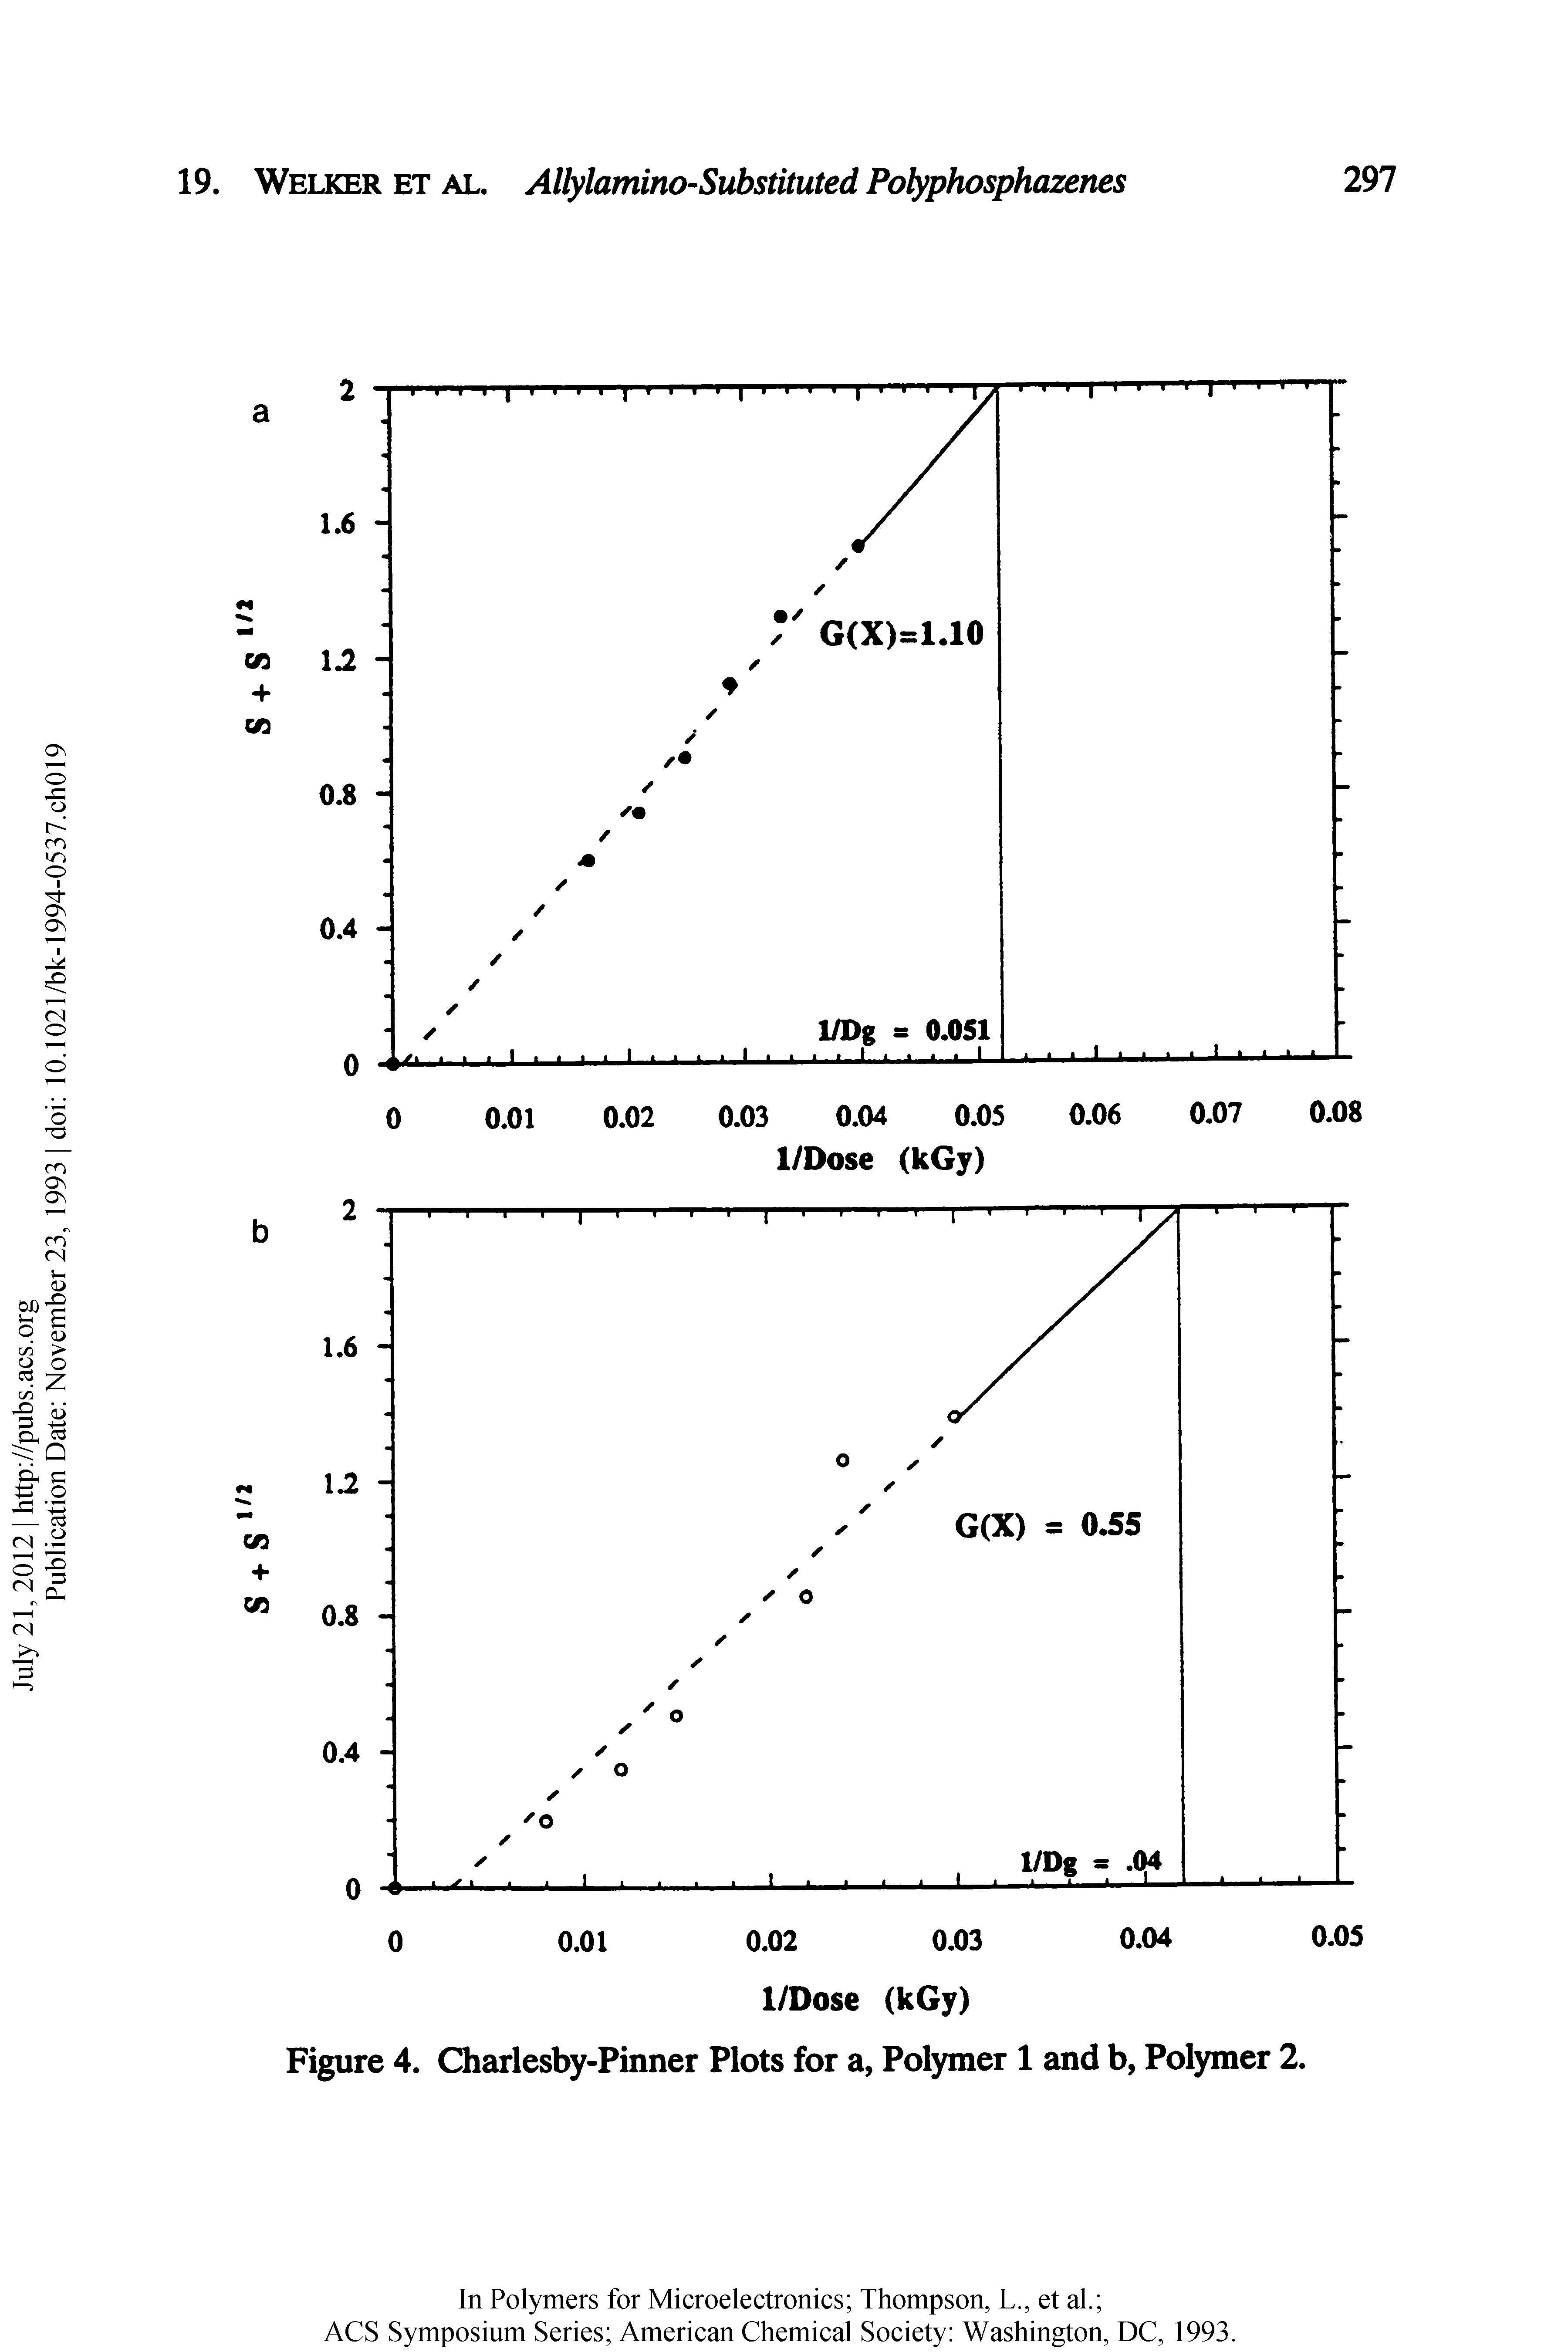 Figure 4. Charlesby-Pinner Plots for a, Polymer 1 and b, Polymer 2.